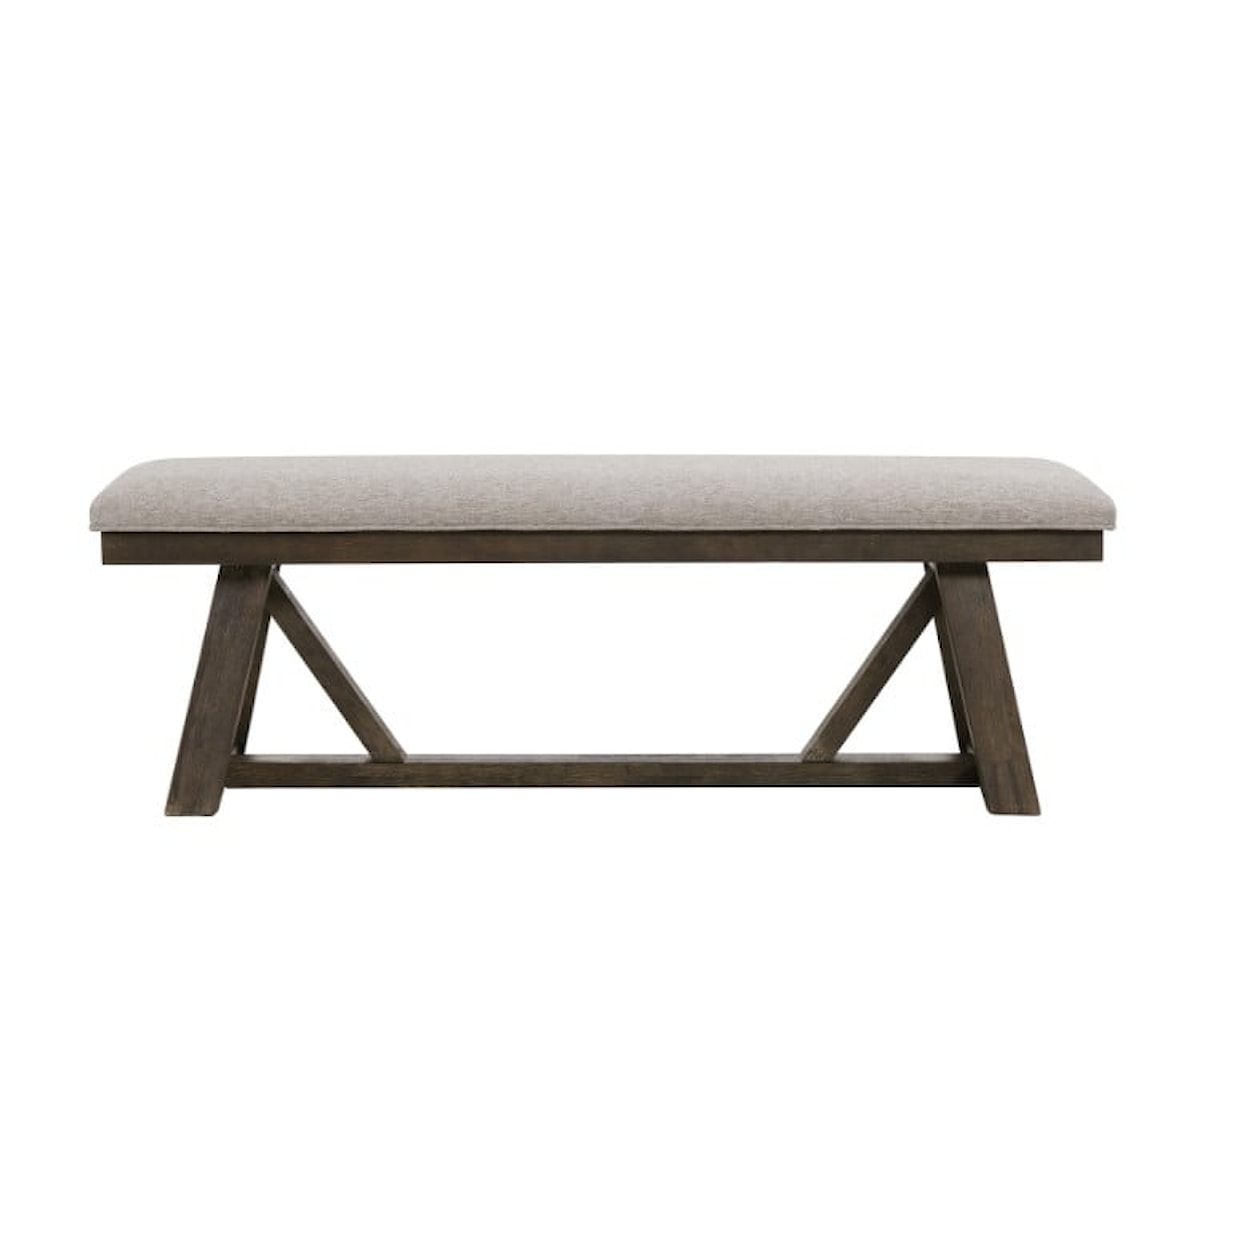 Intercon Hearst Upholstered Dining Bench